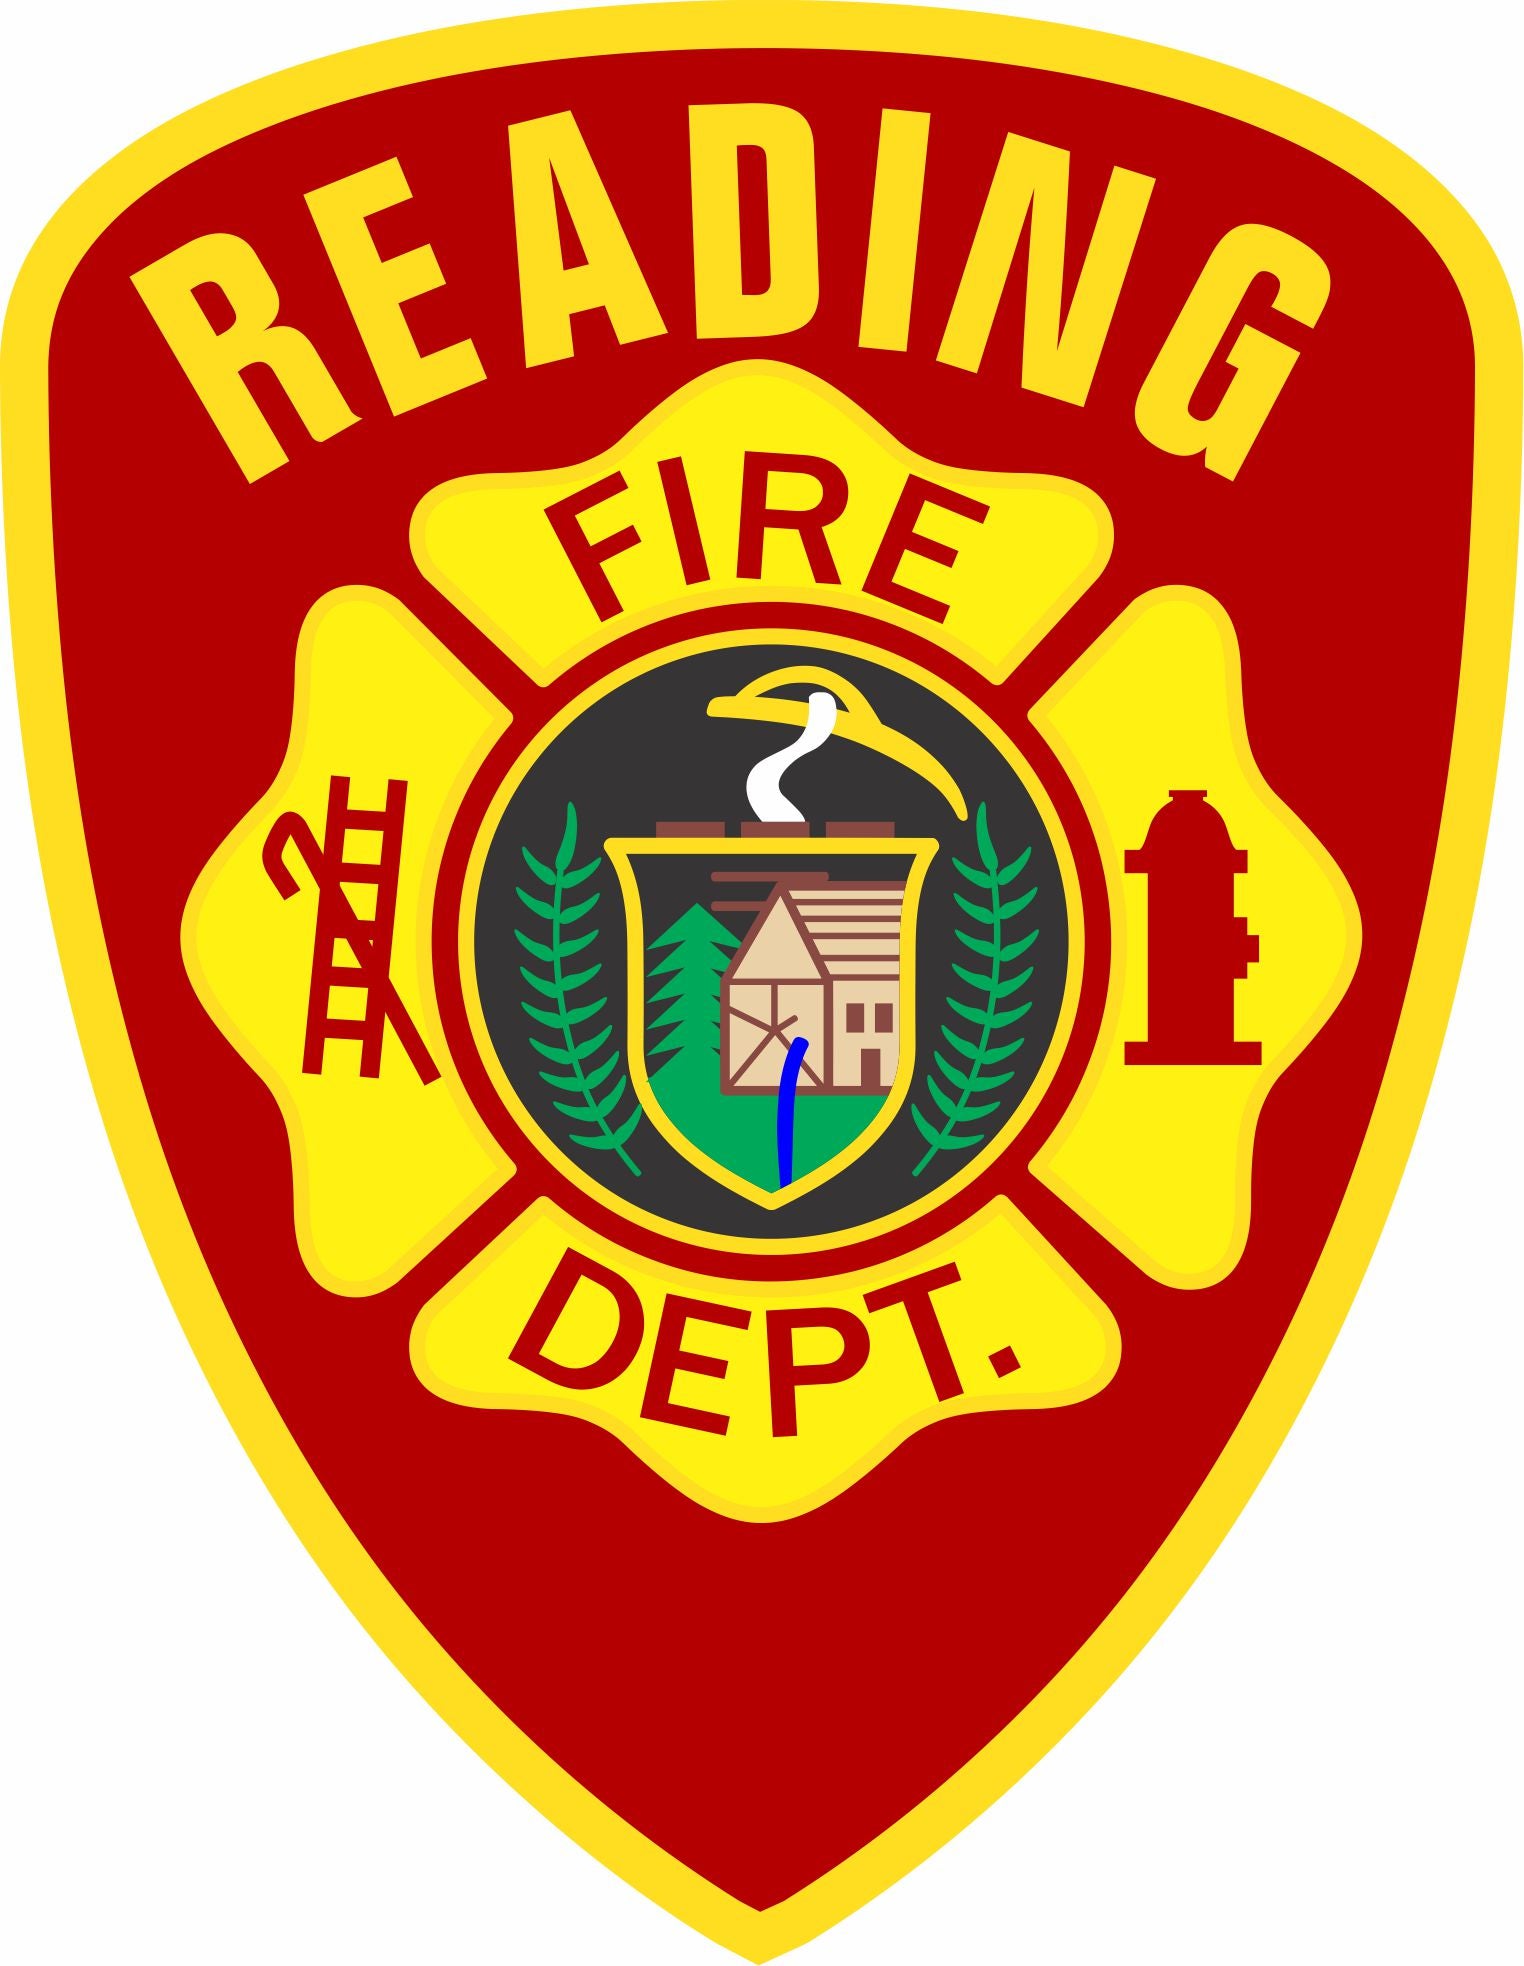 Reading Fire Department Customer Decal - Powercall Sirens LLC